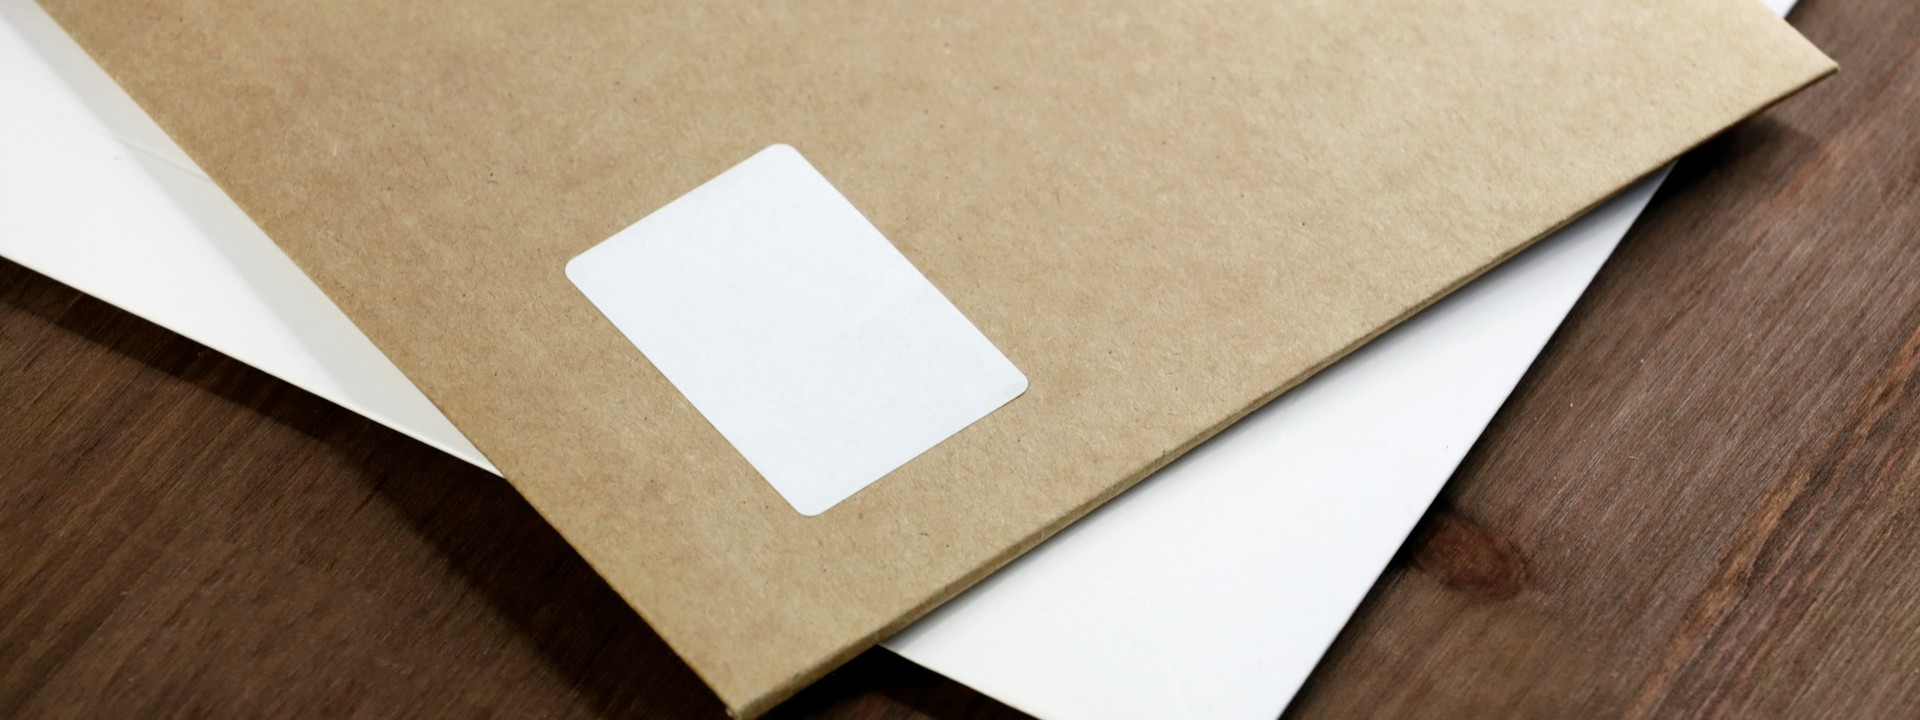 white_paper_on_brown_wooden_table - ©mediamodifier